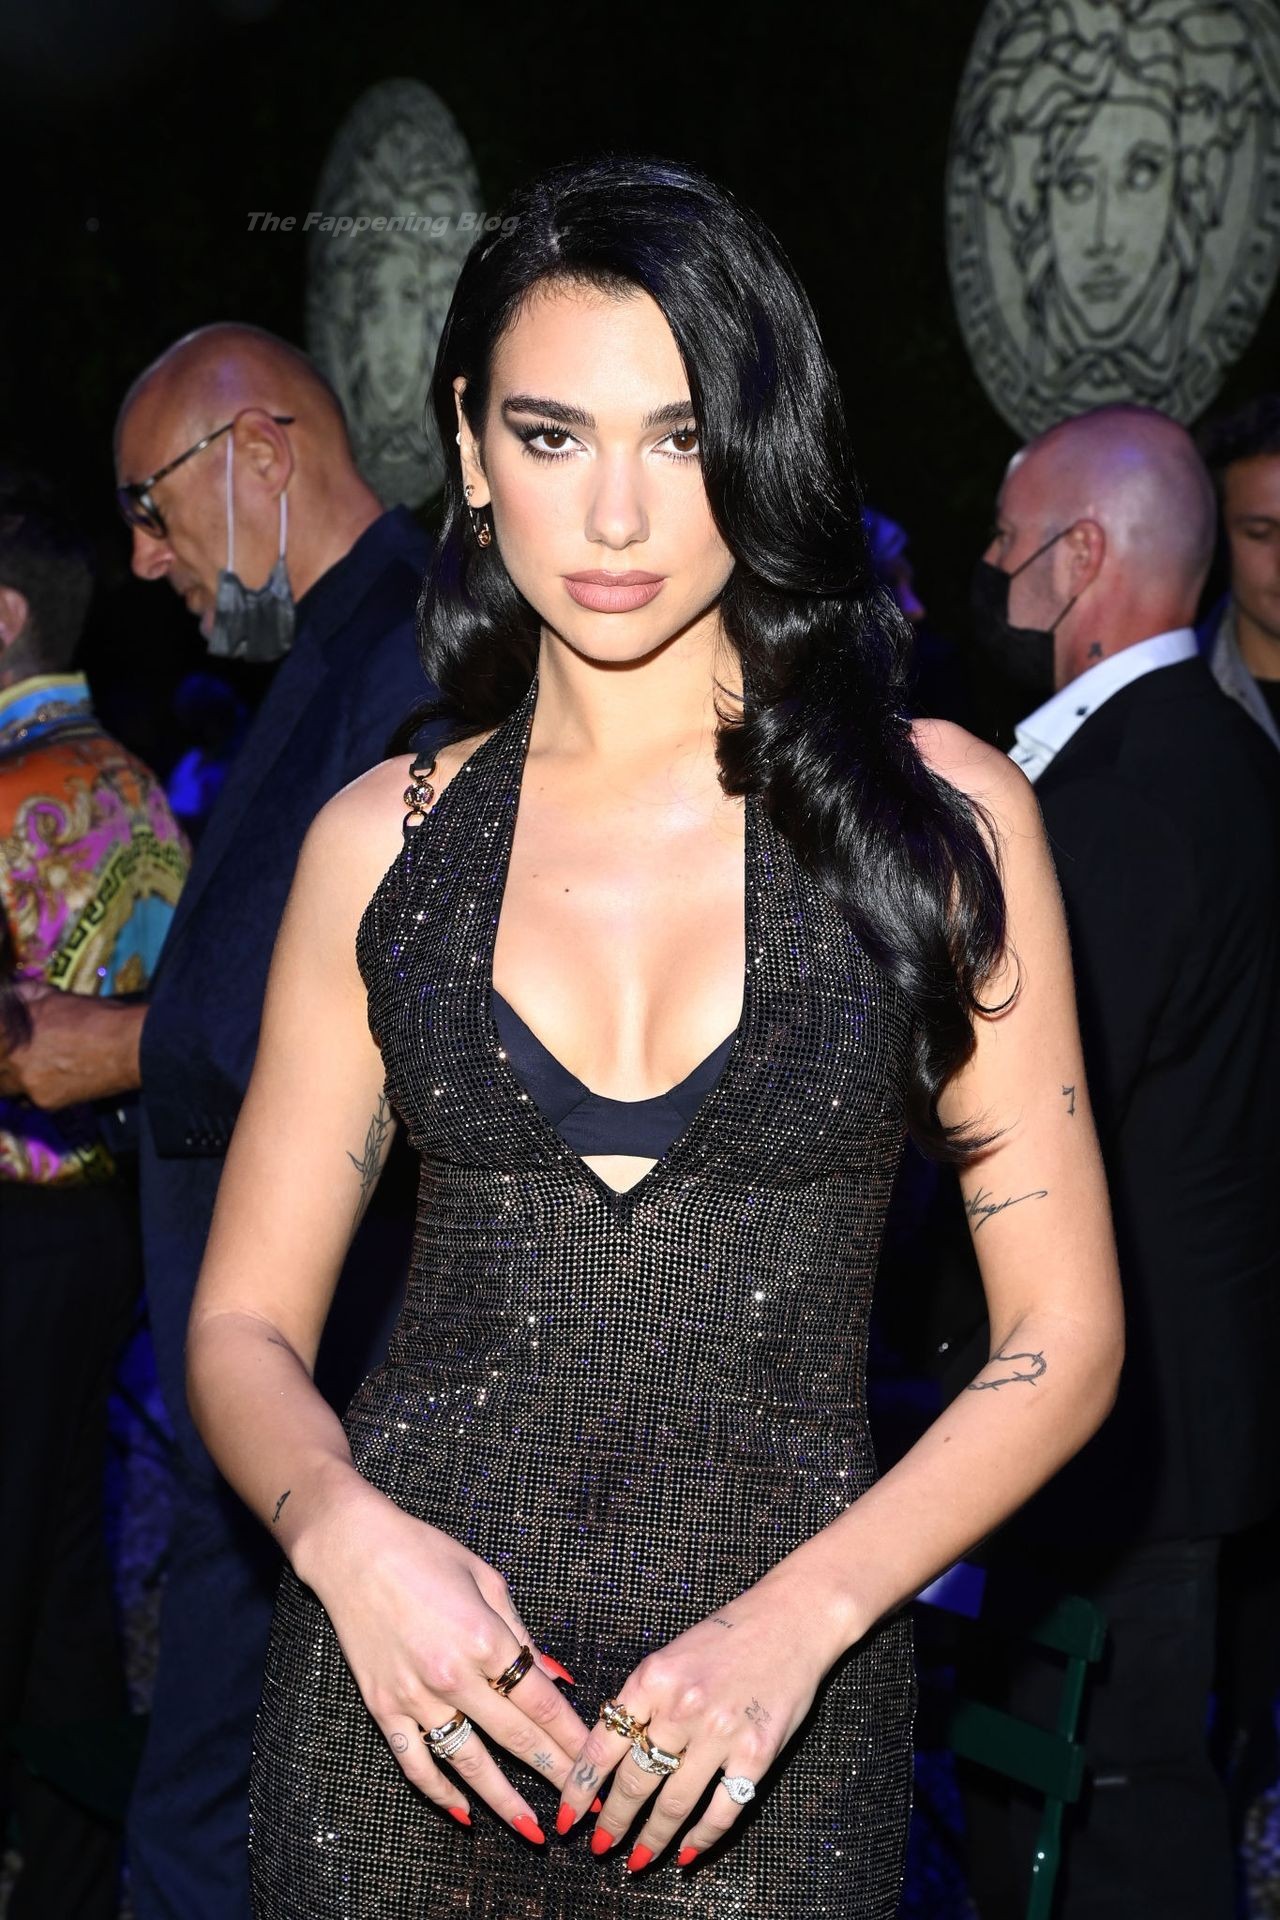 Dua Lipa Puts on a Sultry Display at the Versace-Fendi Fashion Show (110 Photos) [Updated
]